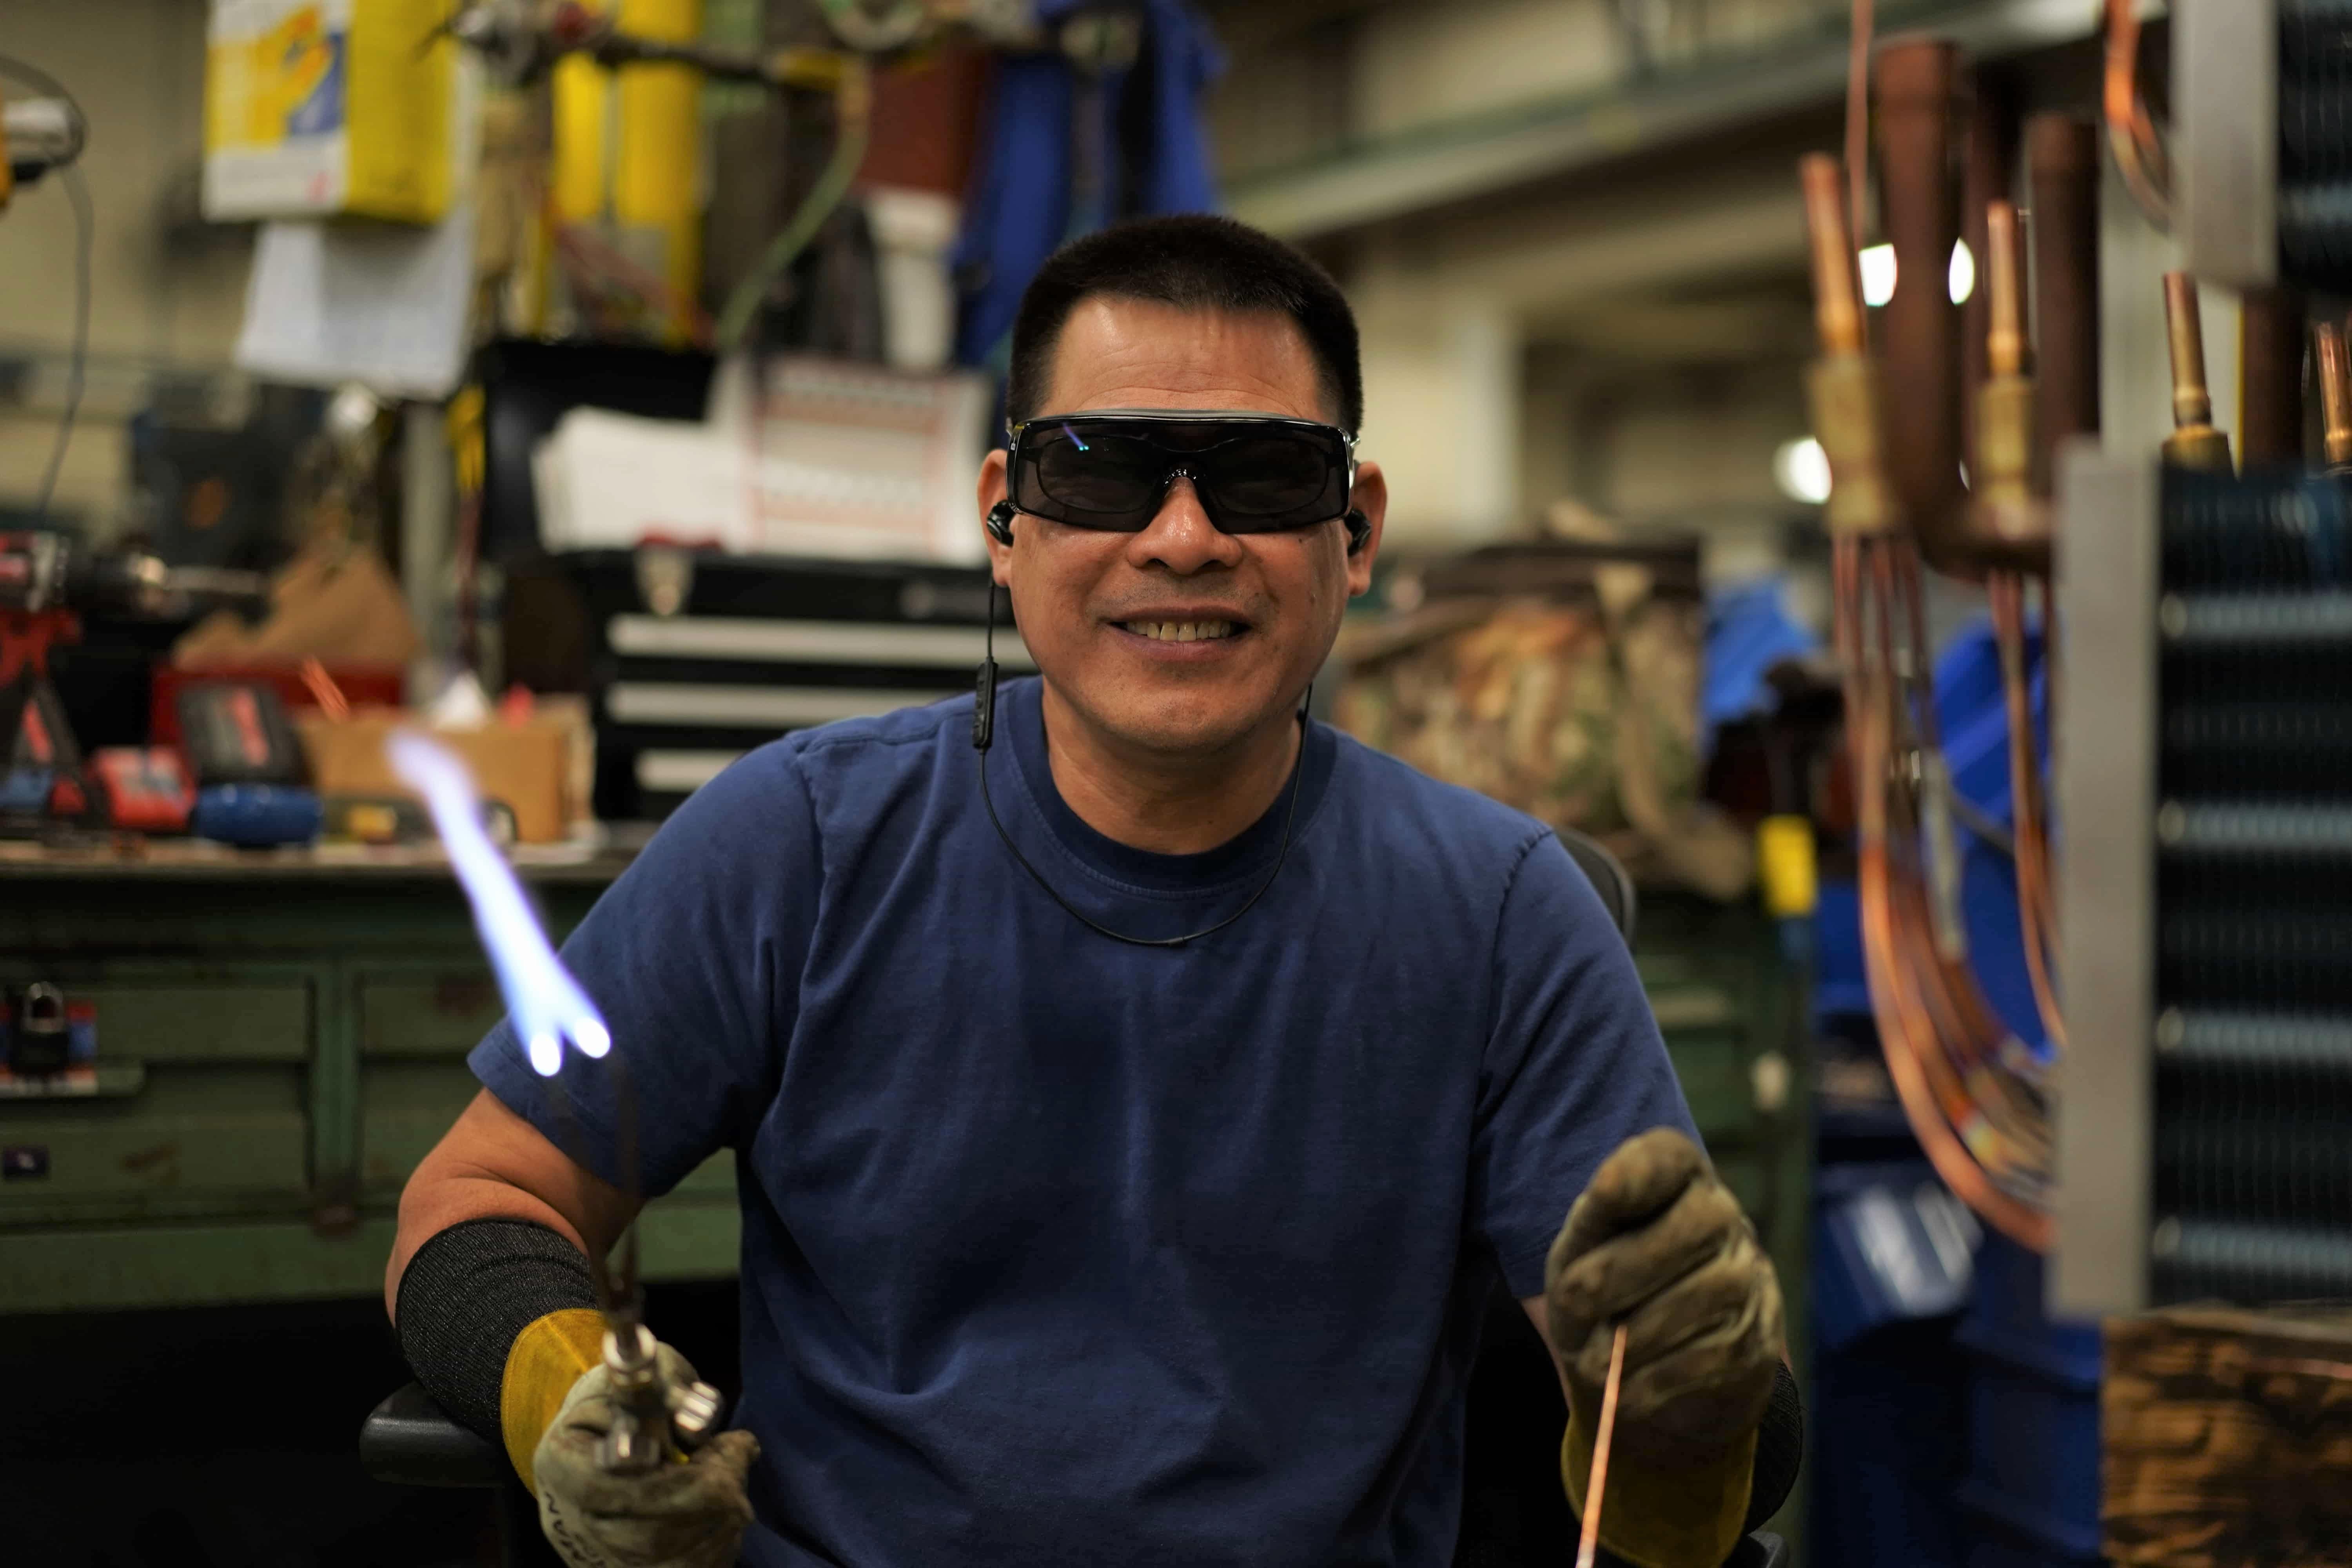 brazer smiling and holding lit torch in factory setting